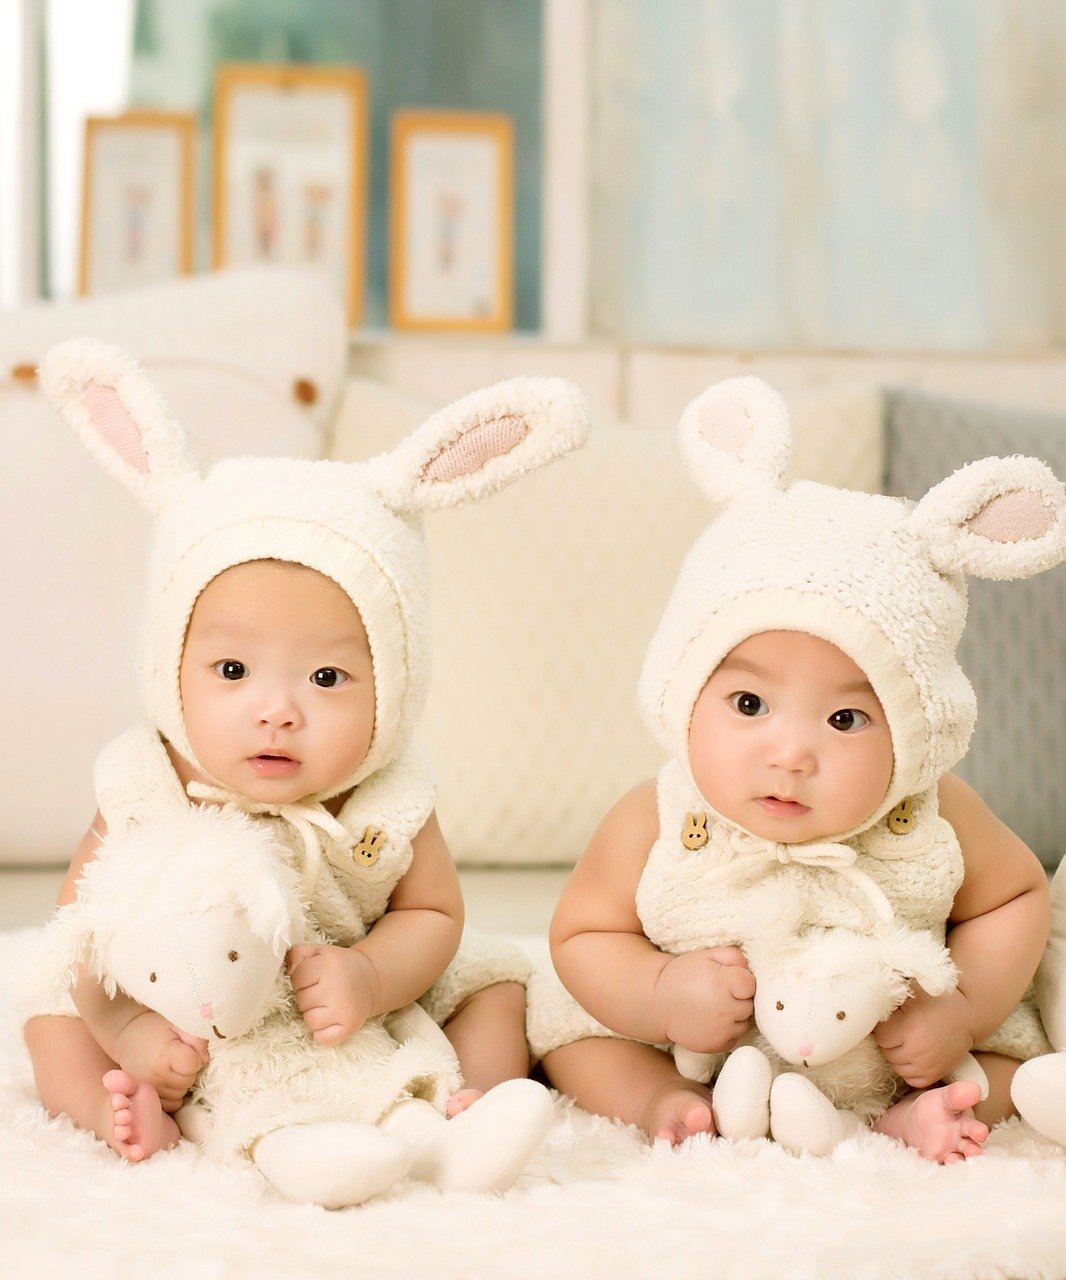 Two cute Asian babies dressed in bunny costumes while holding stuffed animals | Photo: Pixabay/1035352